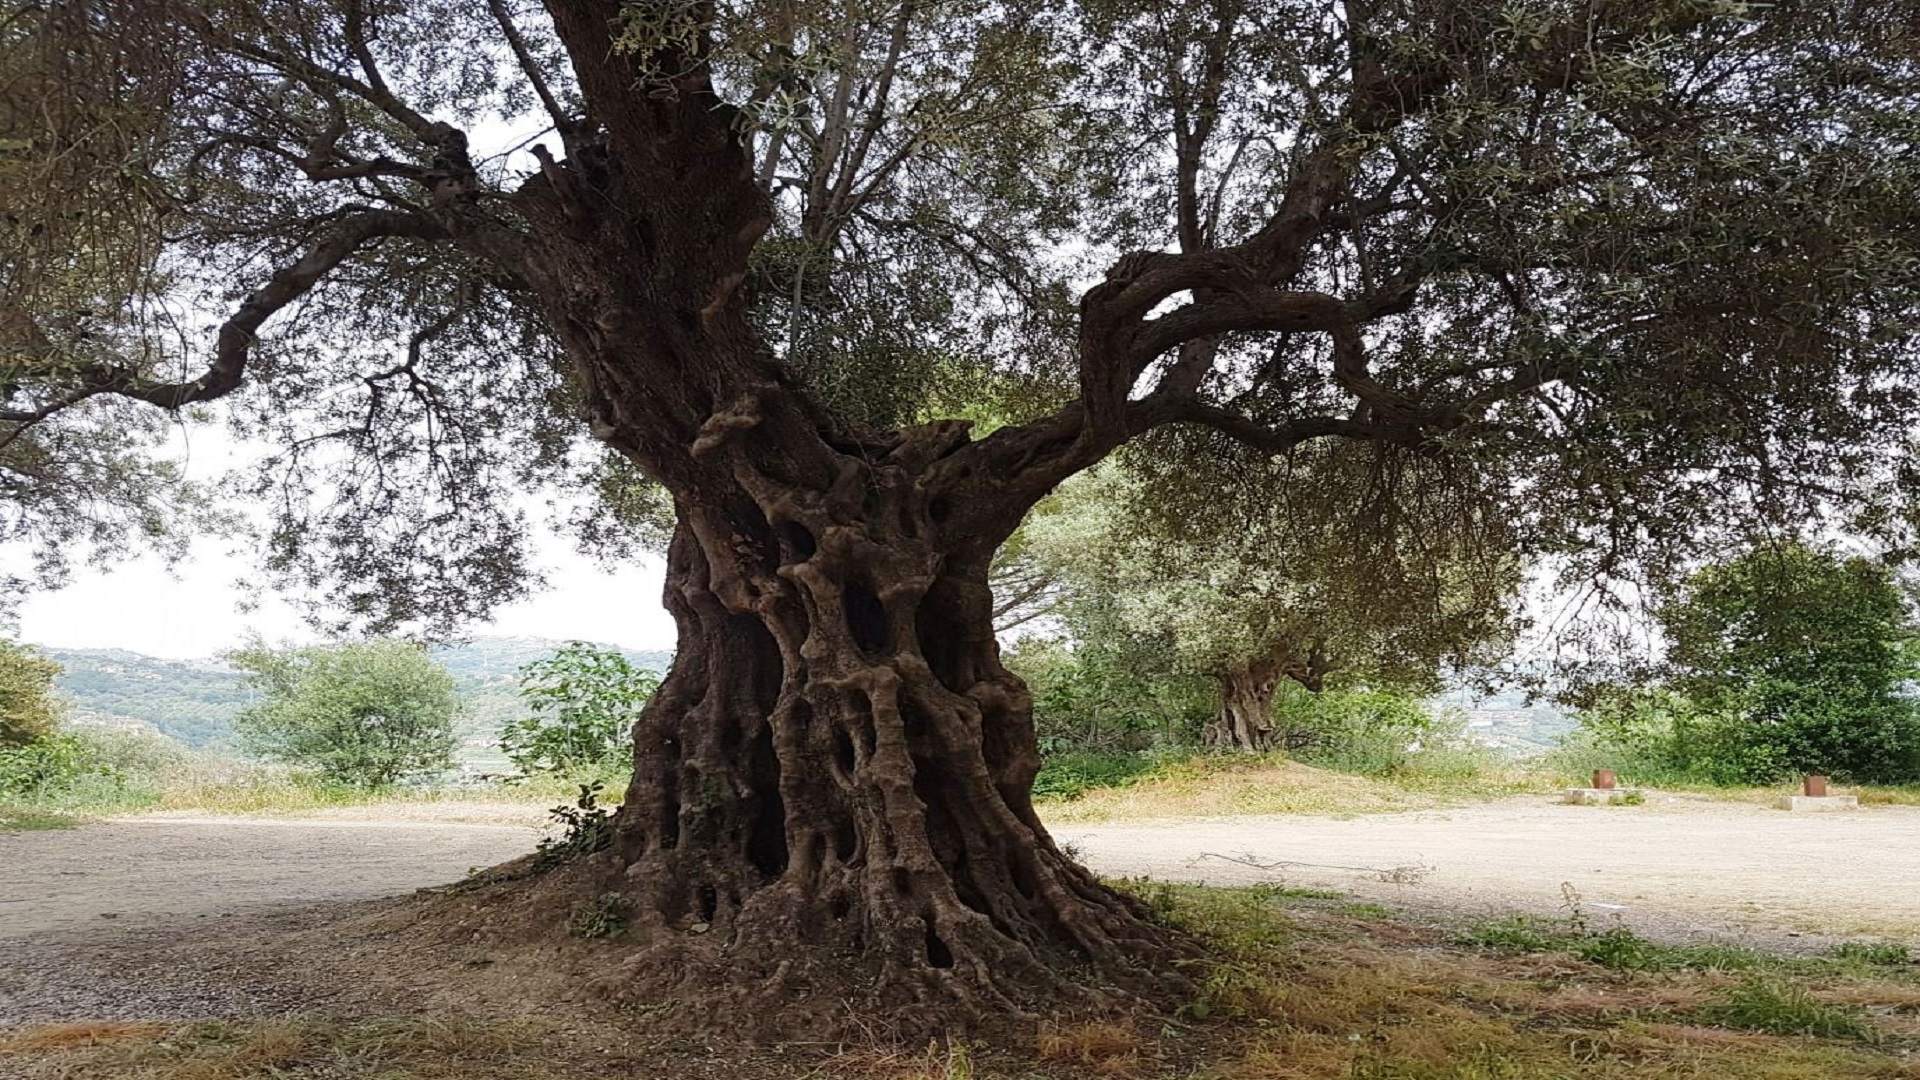 The olive tree is a gift from Minerva